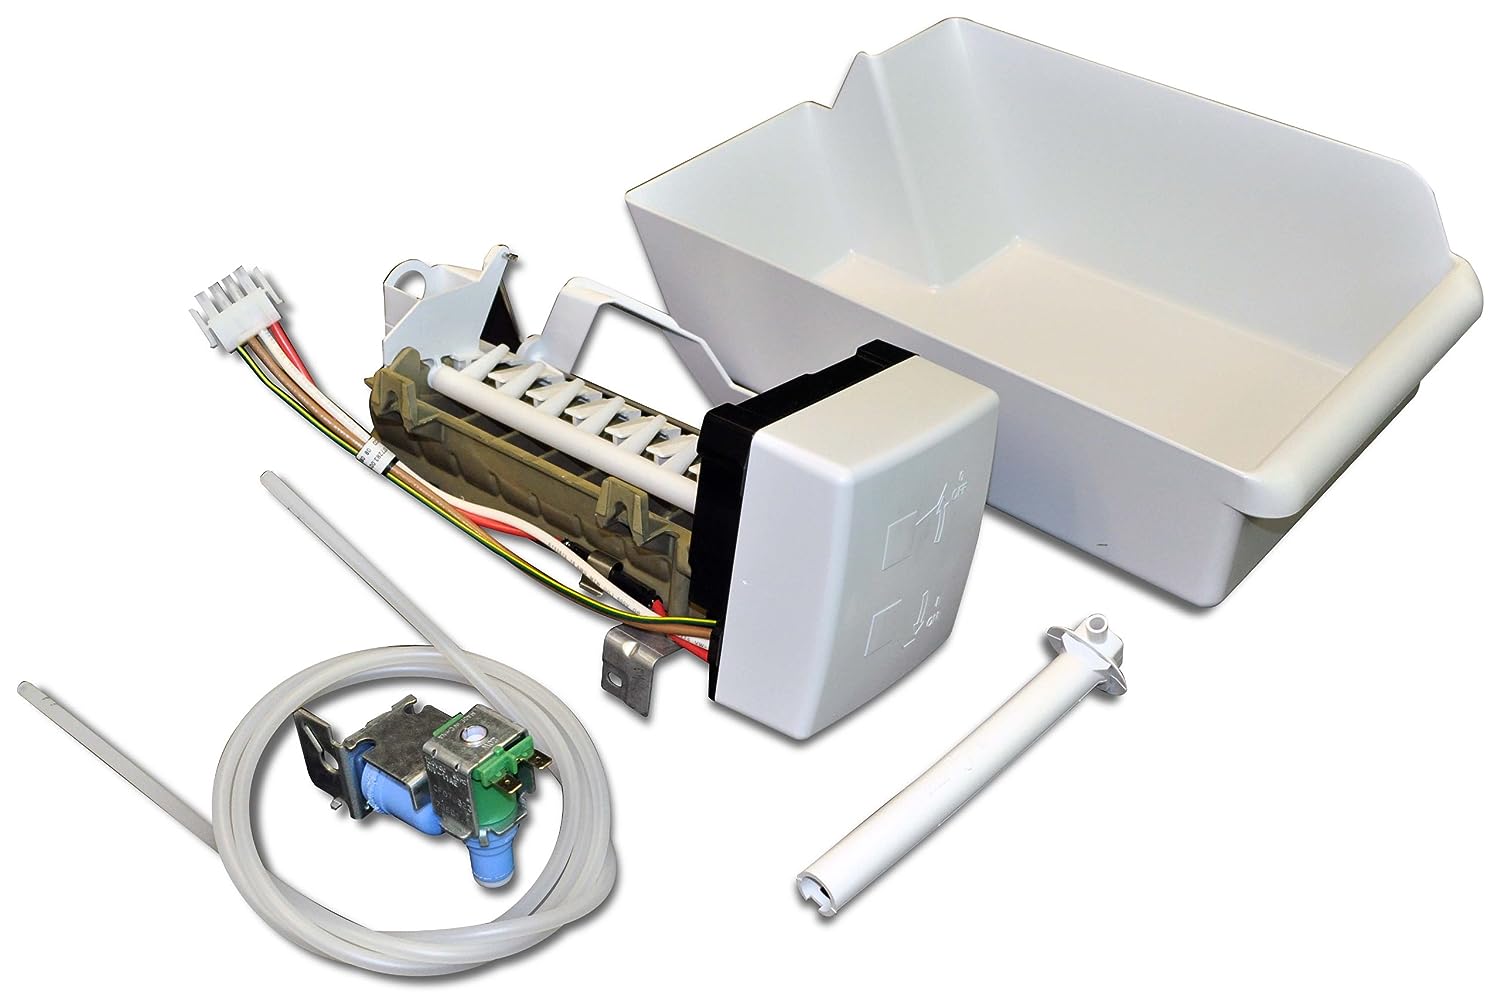 W10715708 Refrigerator Ice Maker Kit Replacement for Whirlpool / KitchenAid  > Speedy Appliance Parts